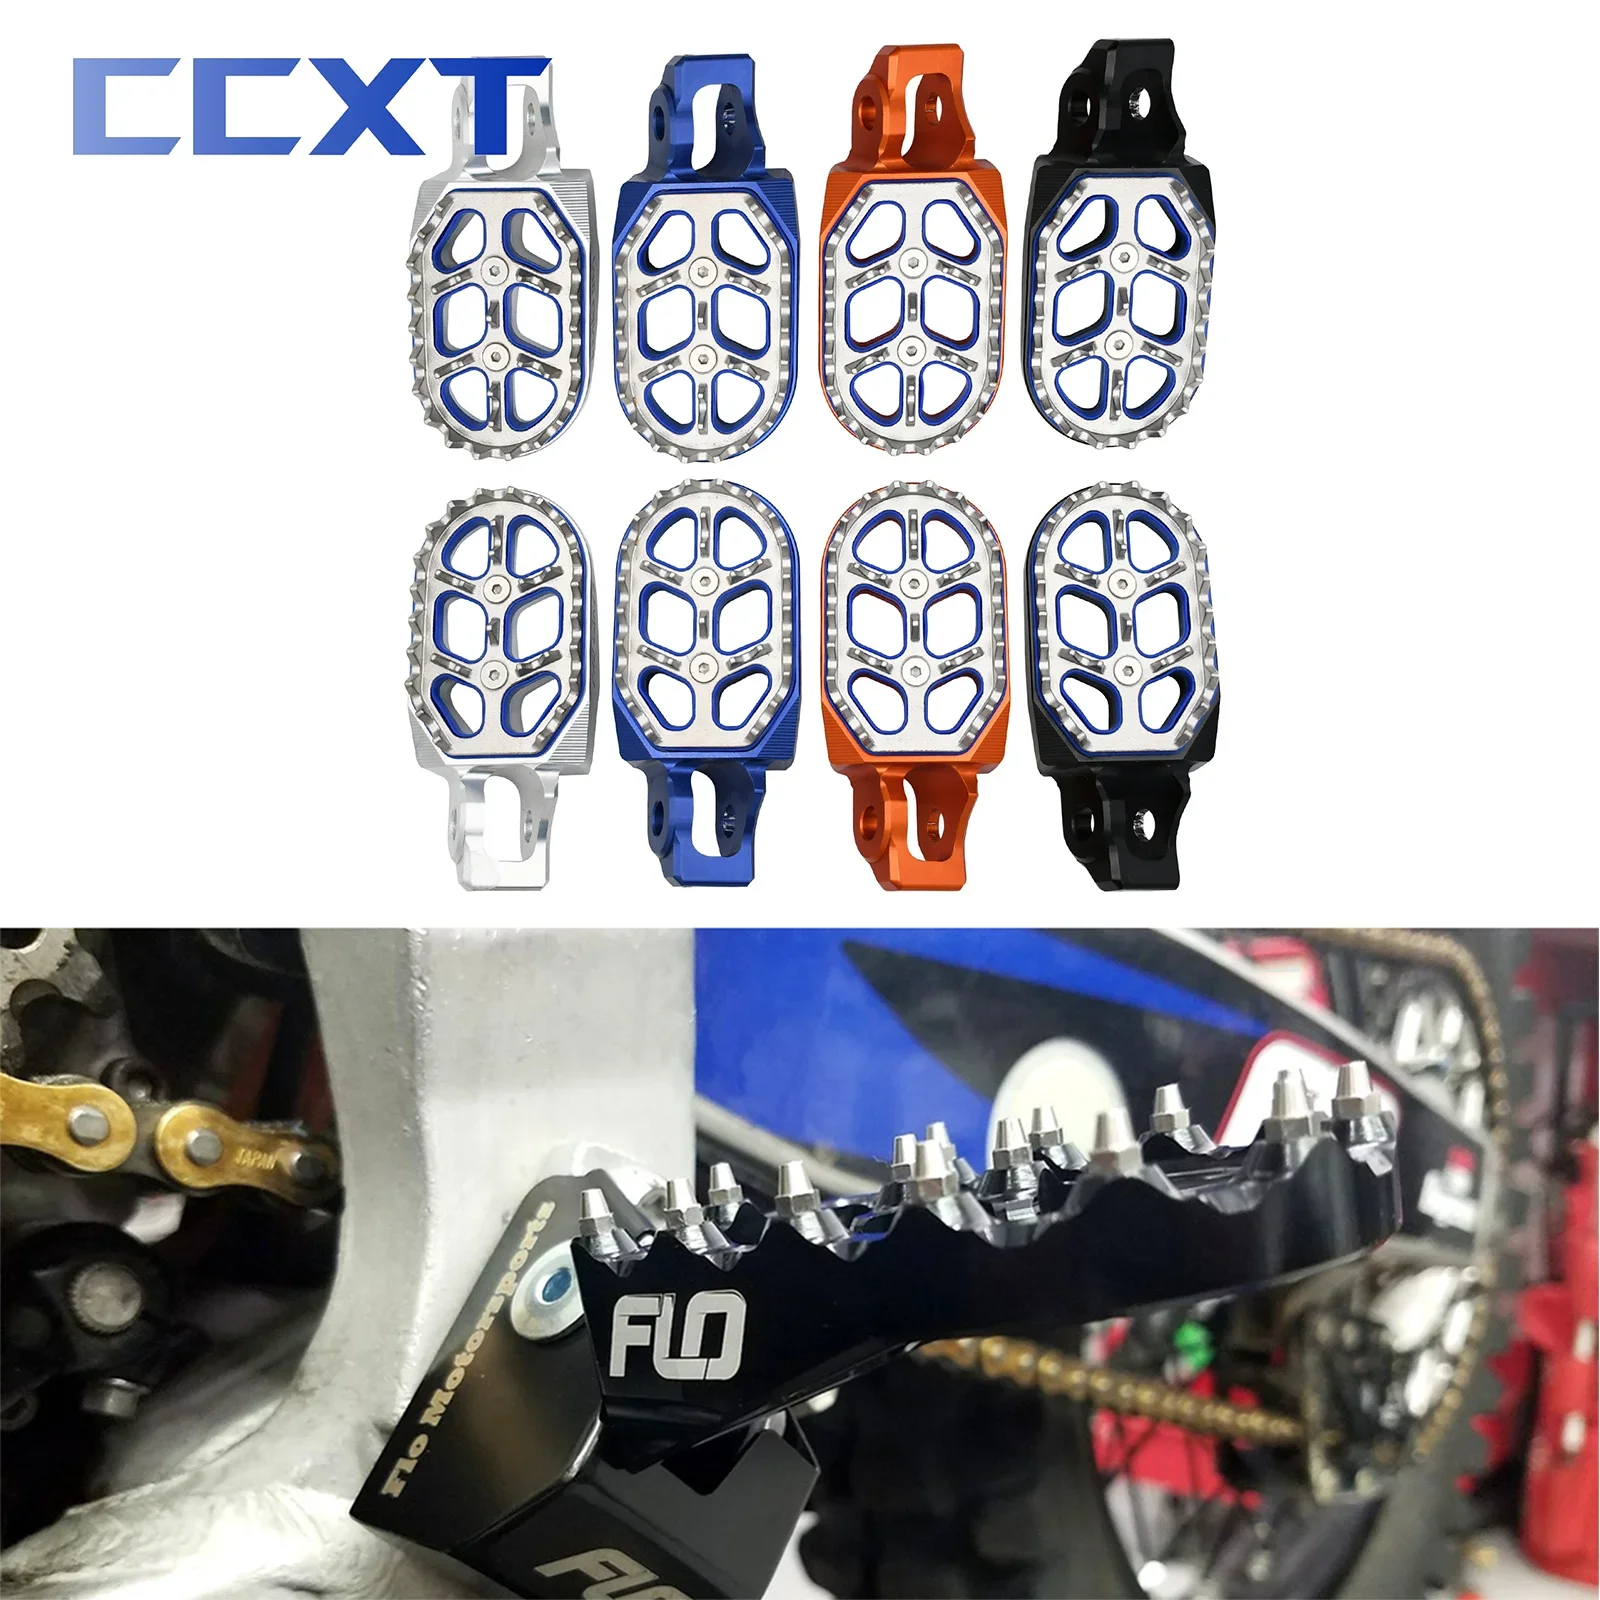 

Motorcycle CNC Aluminum Footpegs Pedals Foot Pegs For KTM EXC XC XCW XCF SX EXCF SXF For Husqvarna TC TE TX FE FX FS FC 85-530cc